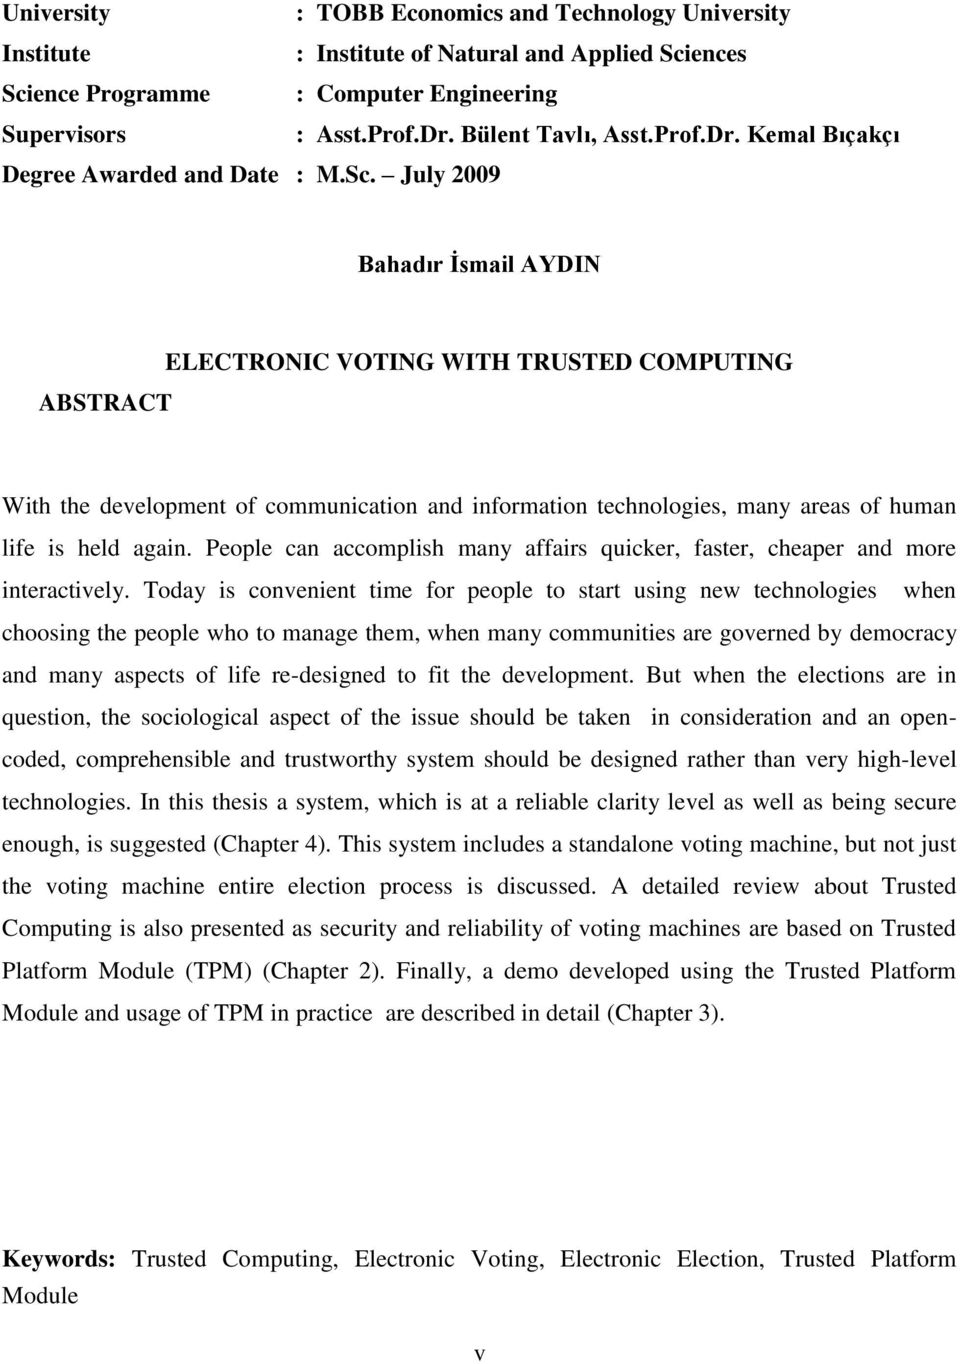 July 2009 Bahadır Ġsmail AYDIN ABSTRACT ELECTRONIC VOTING WITH TRUSTED COMPUTING With the development of communication and information technologies, many areas of human life is held again.